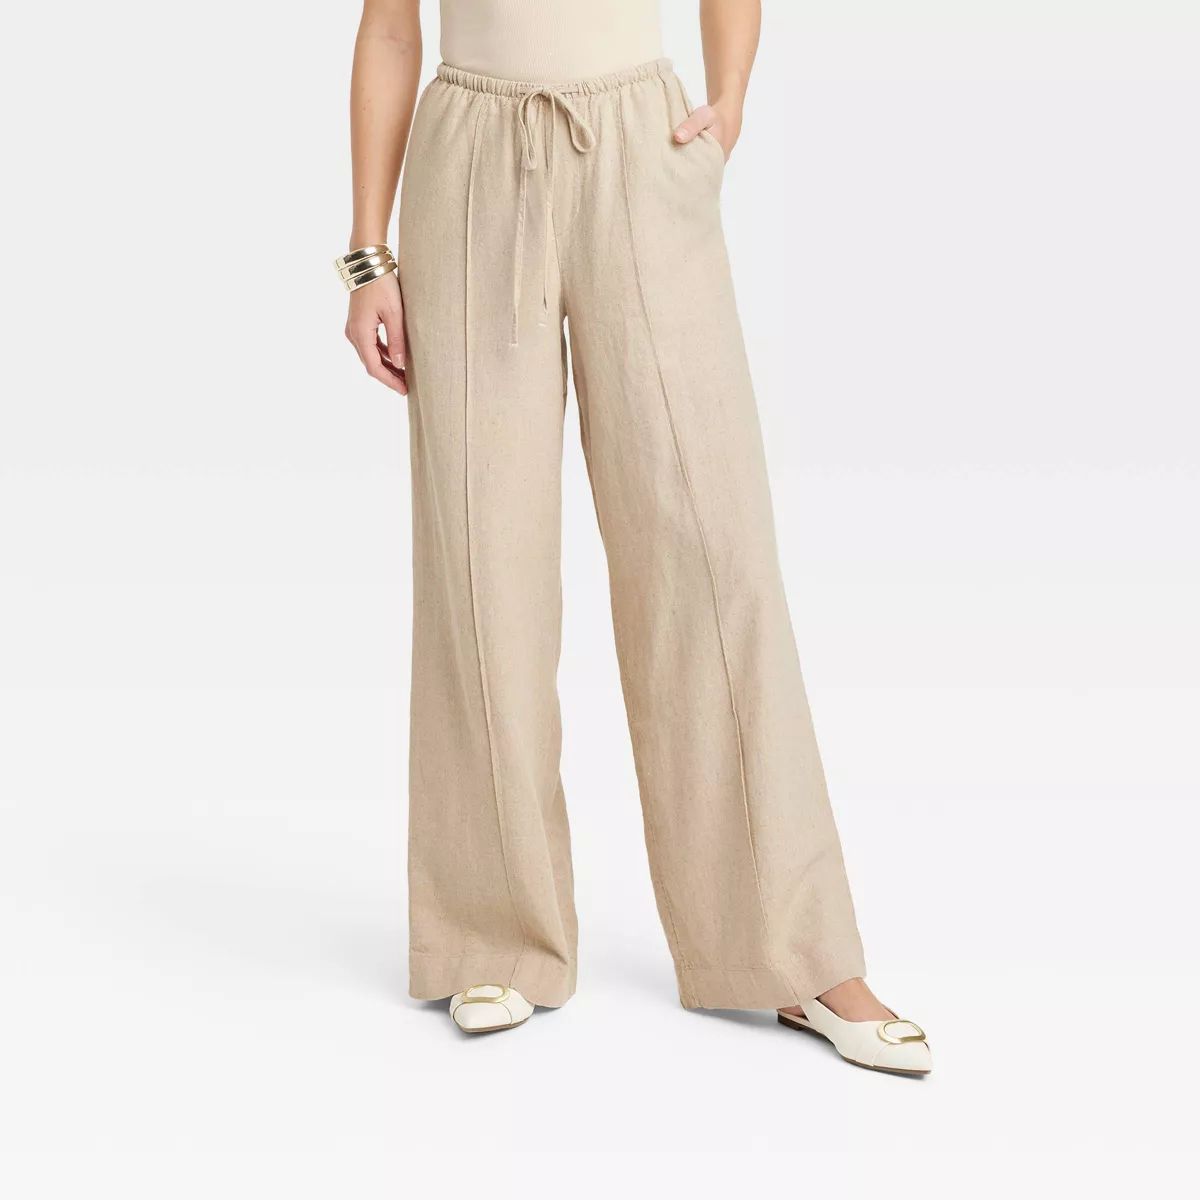 Women's High-Rise Wide Leg Linen Pull-On Pants - A New Day™ Tan XS | Target